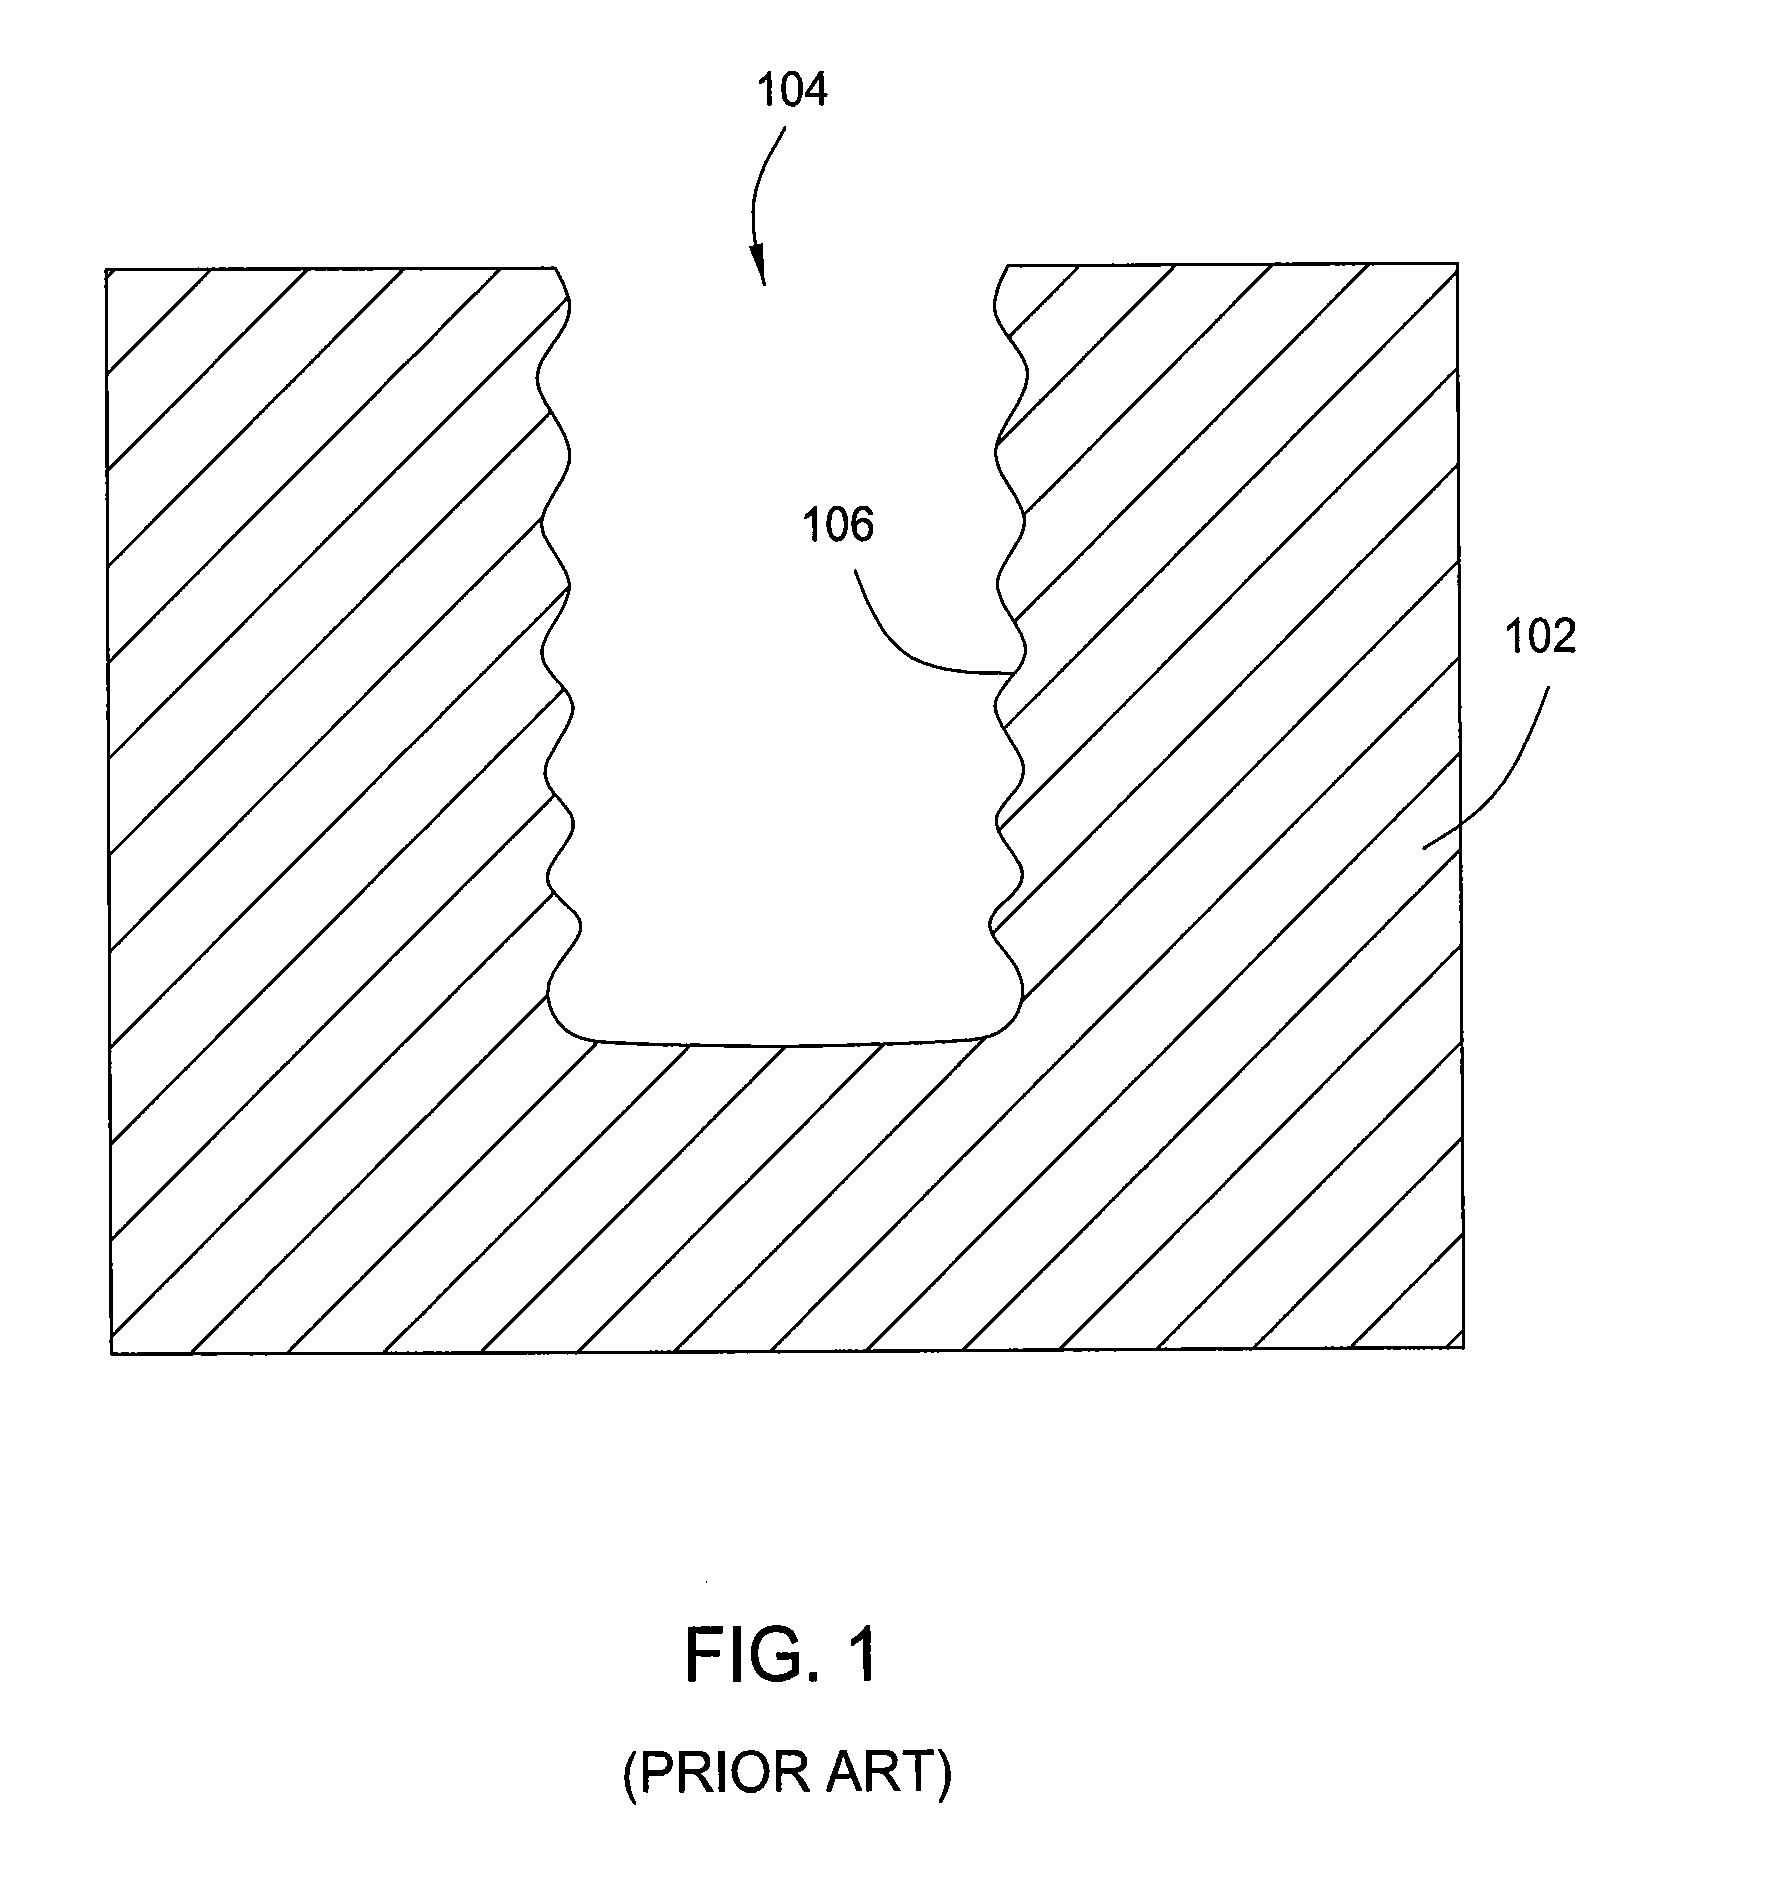 Methods for etching through-silicon vias with tunable profile angles